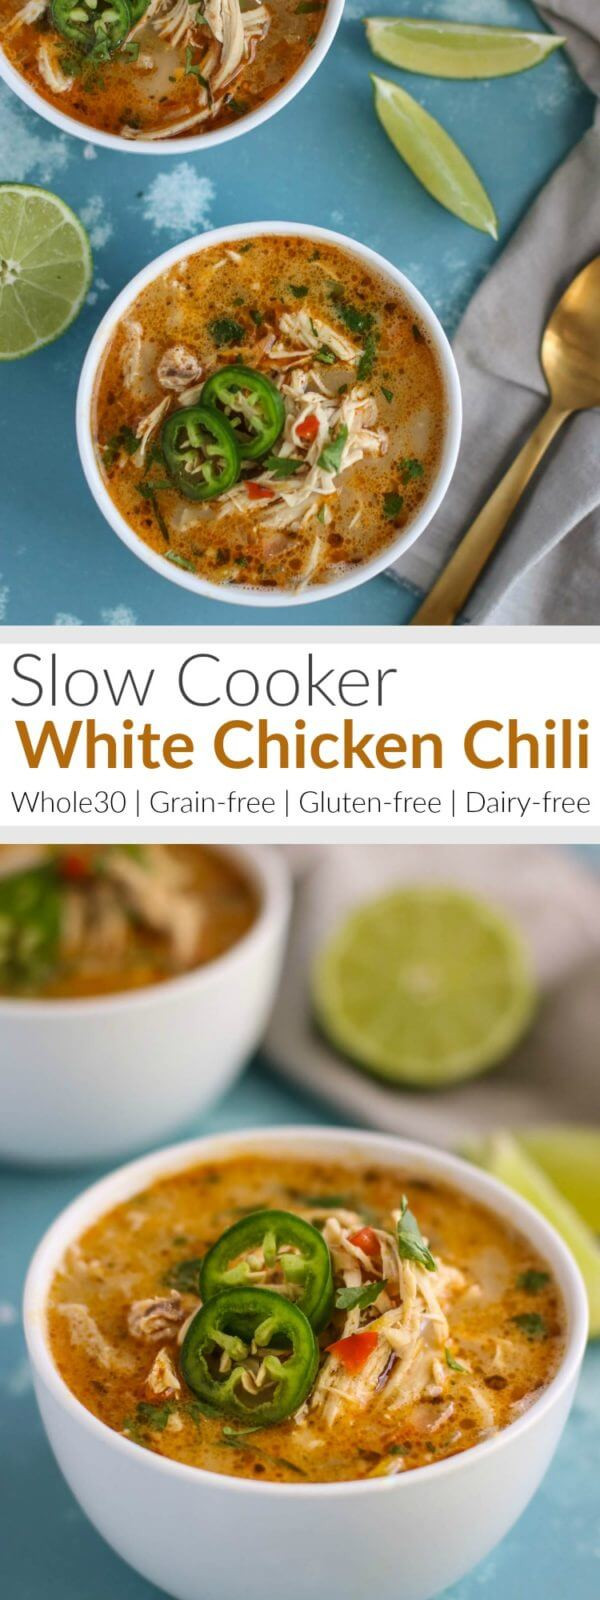 White Chicken Chili Slow Cooker Keto
 5 Keto White Chicken Chili Recipes The Best Food for a